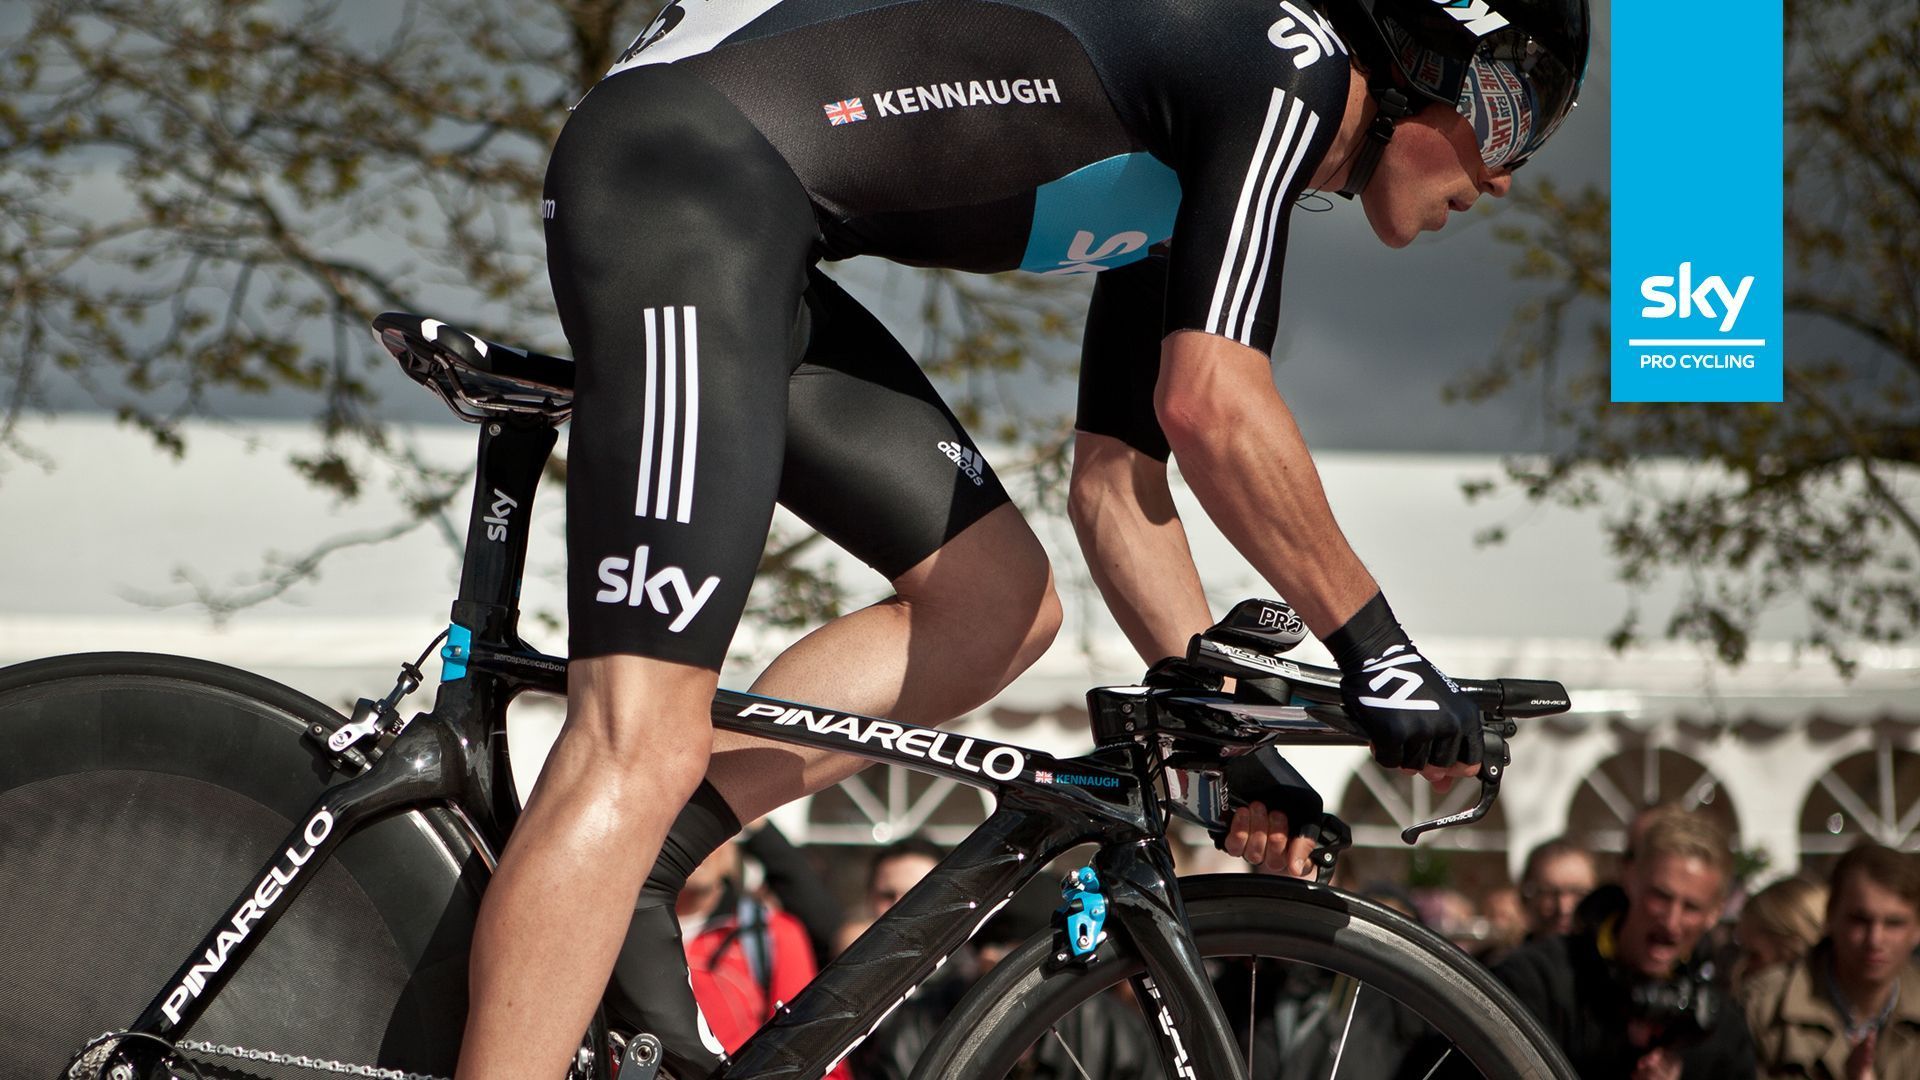 Wallpapers Team Sky Cycling Pro 1920x1080 | #1465838 #team sky cycling